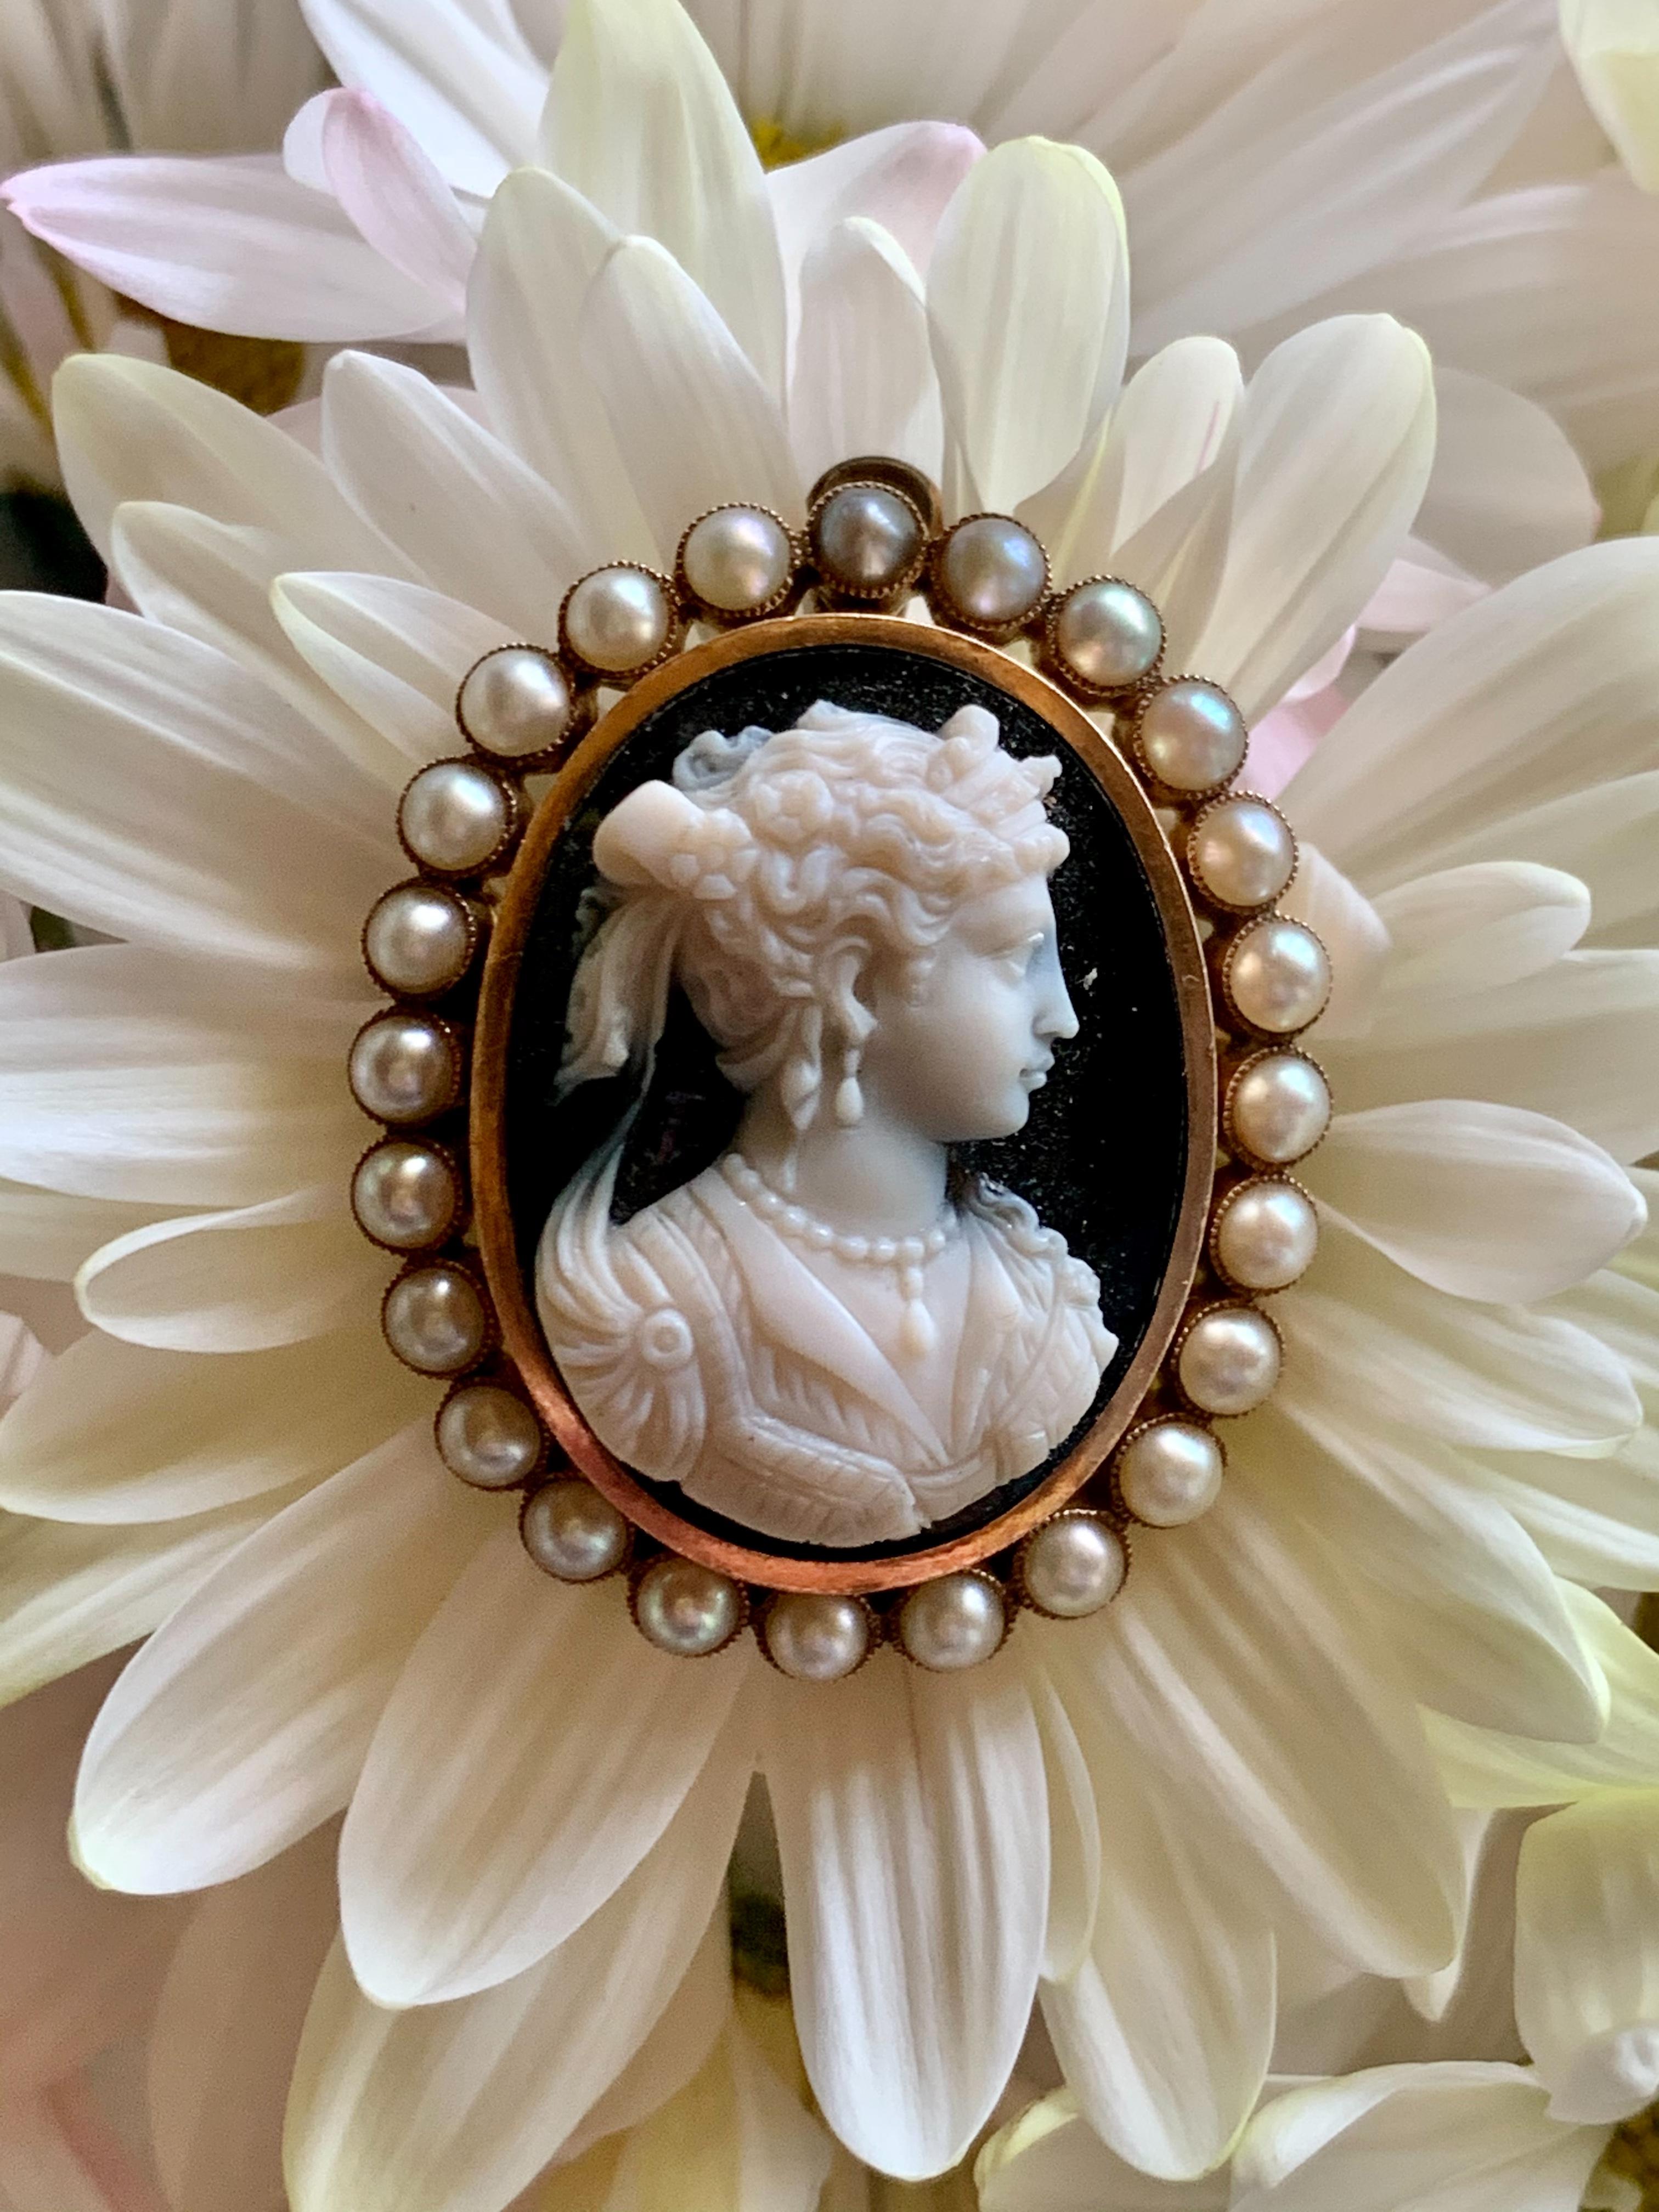 Mixed Cut Victorian Stone Cameo Brooch and Pendant with Pearl Halo in 14 Karat Yellow Gold